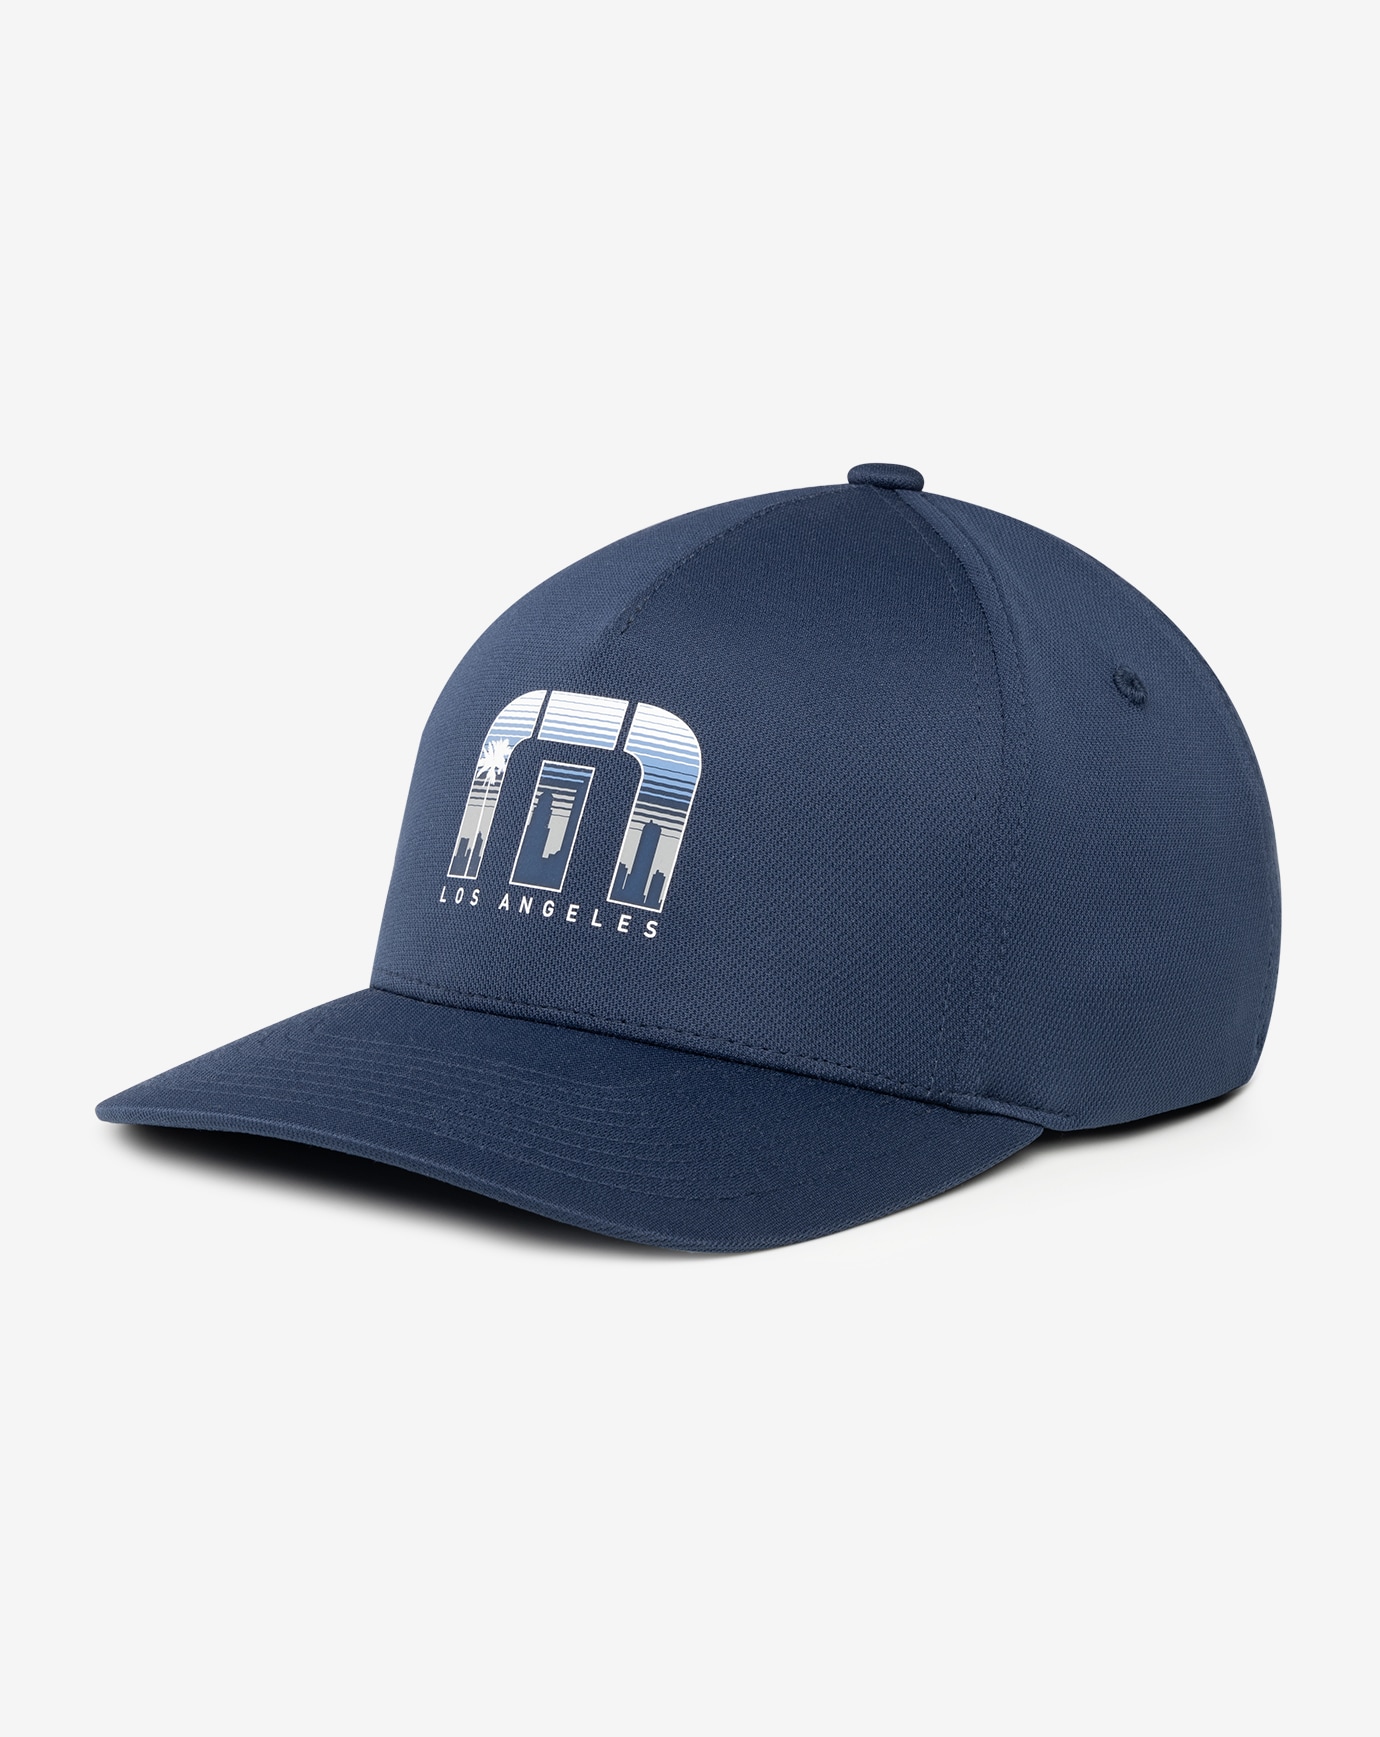 ECHO PARK FITTED HAT Image Thumbnail 2